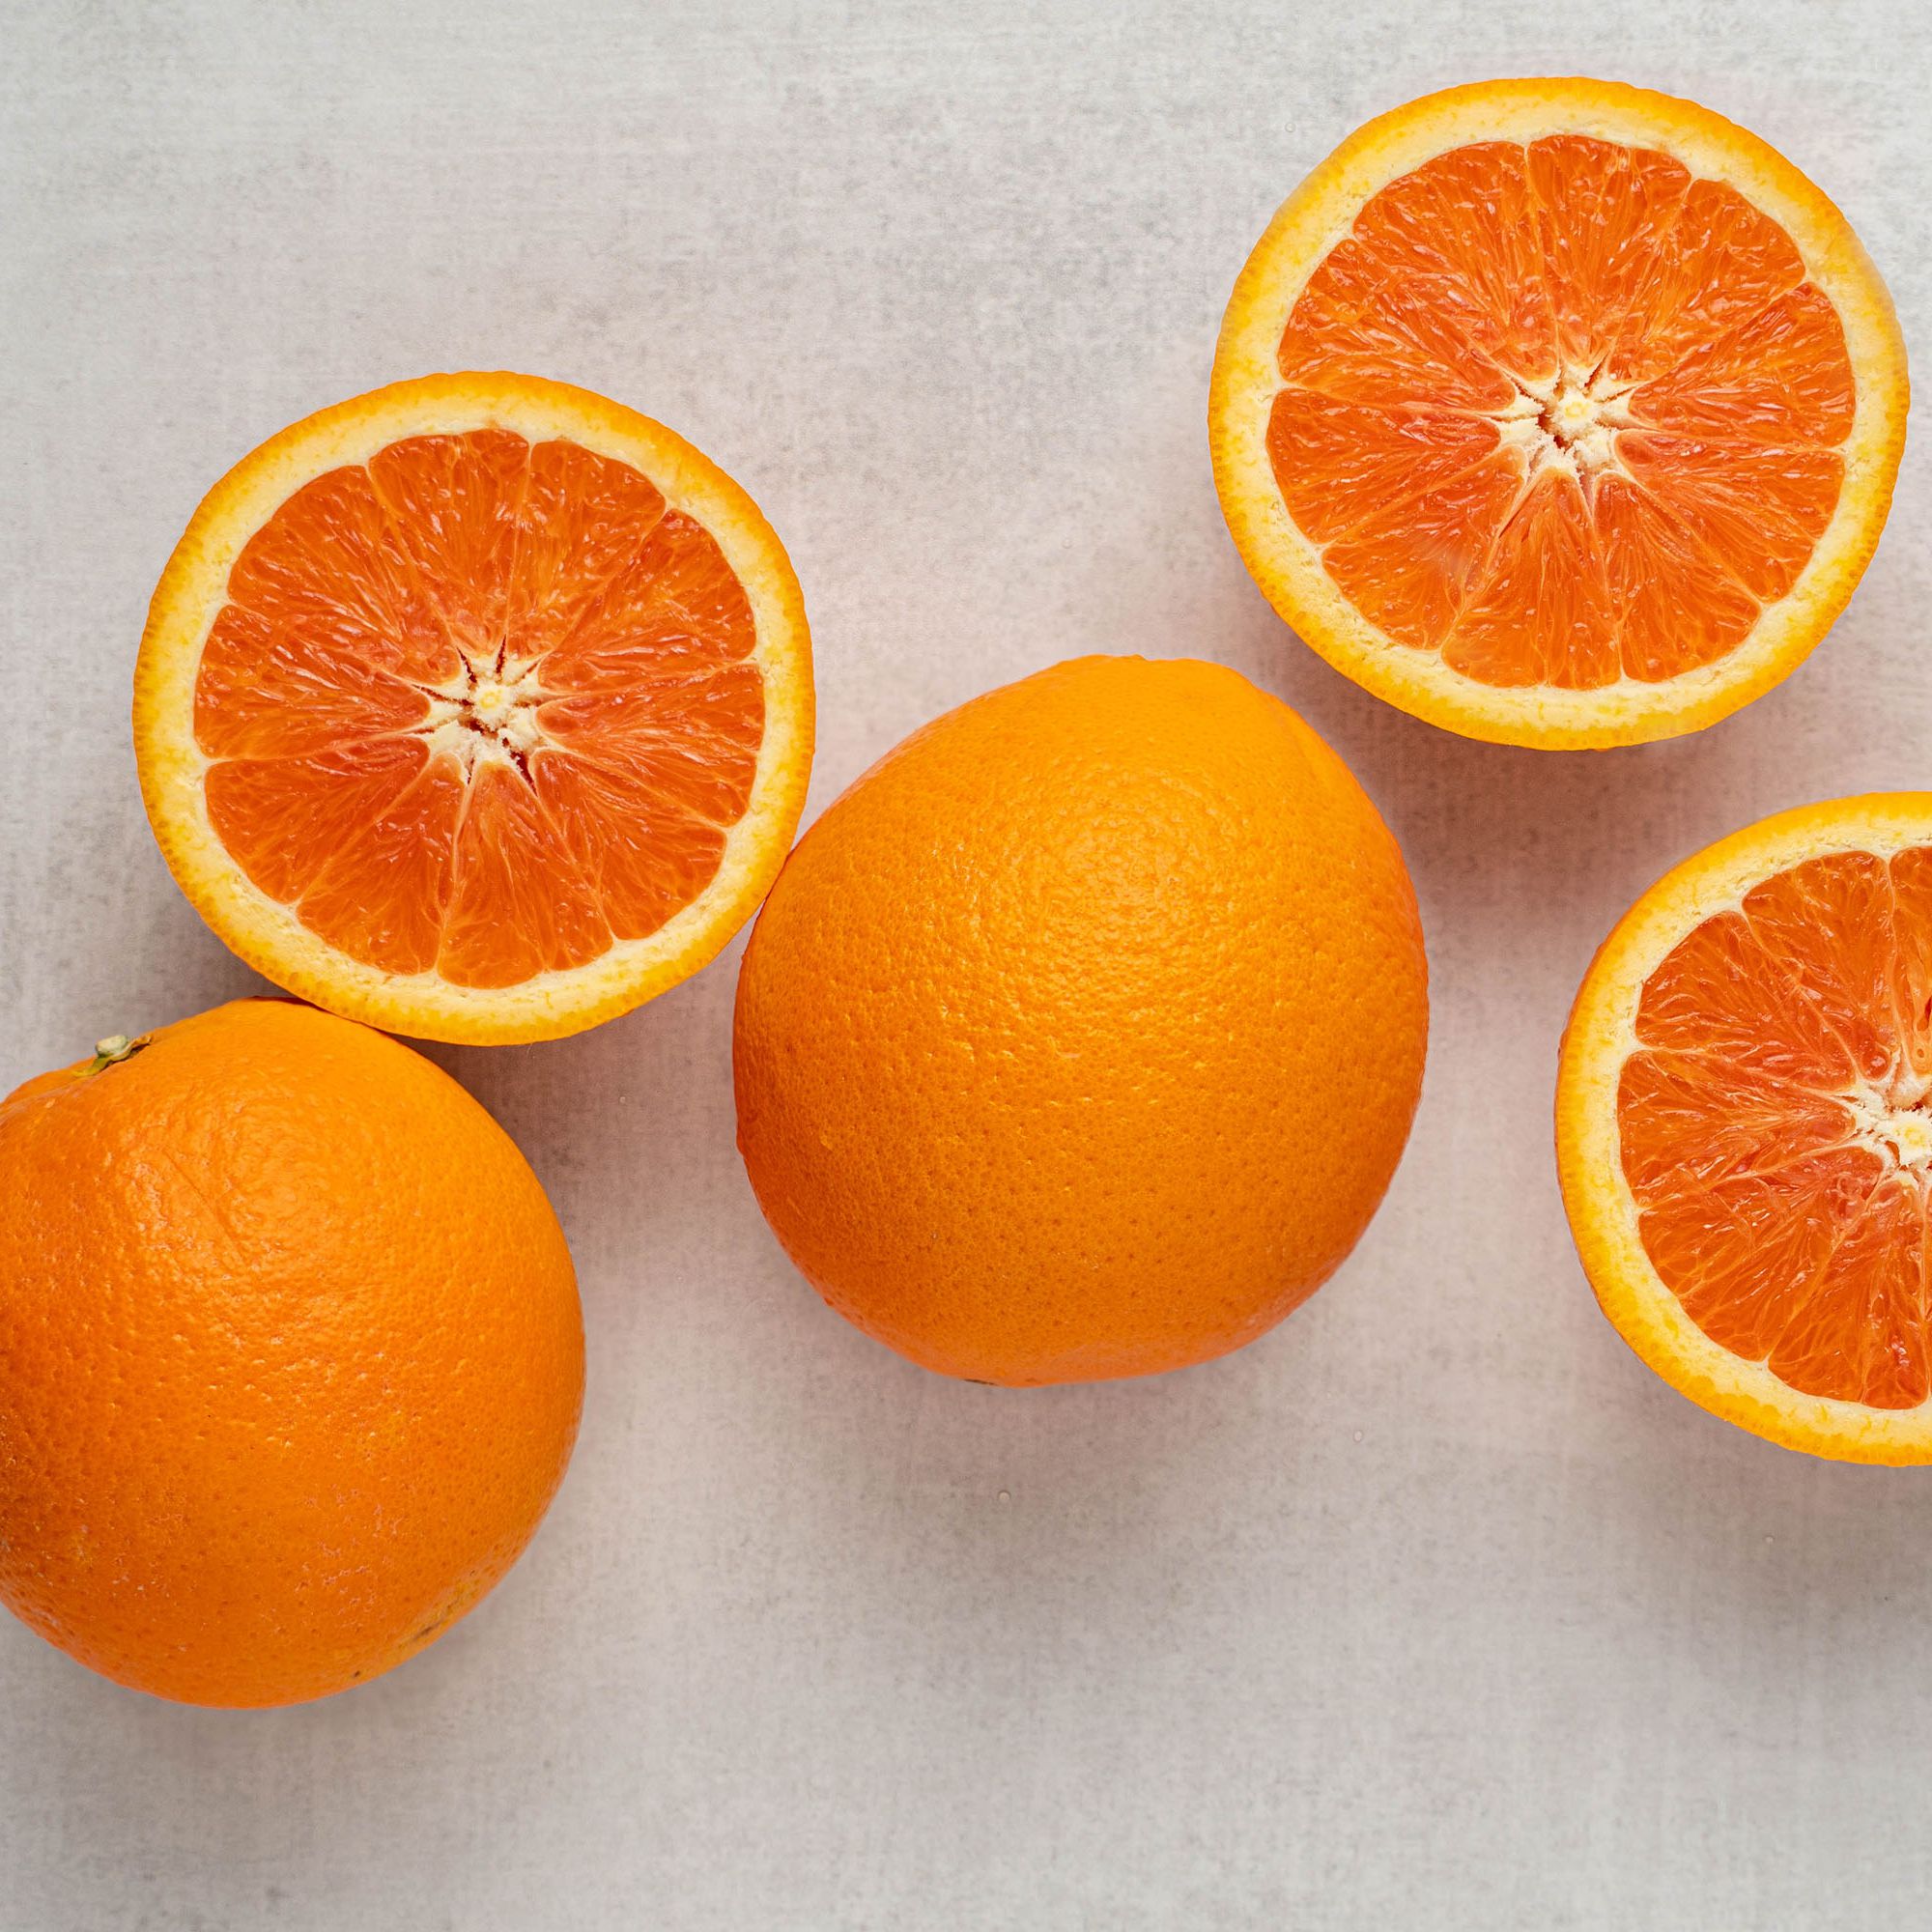 What Are Navel Oranges?